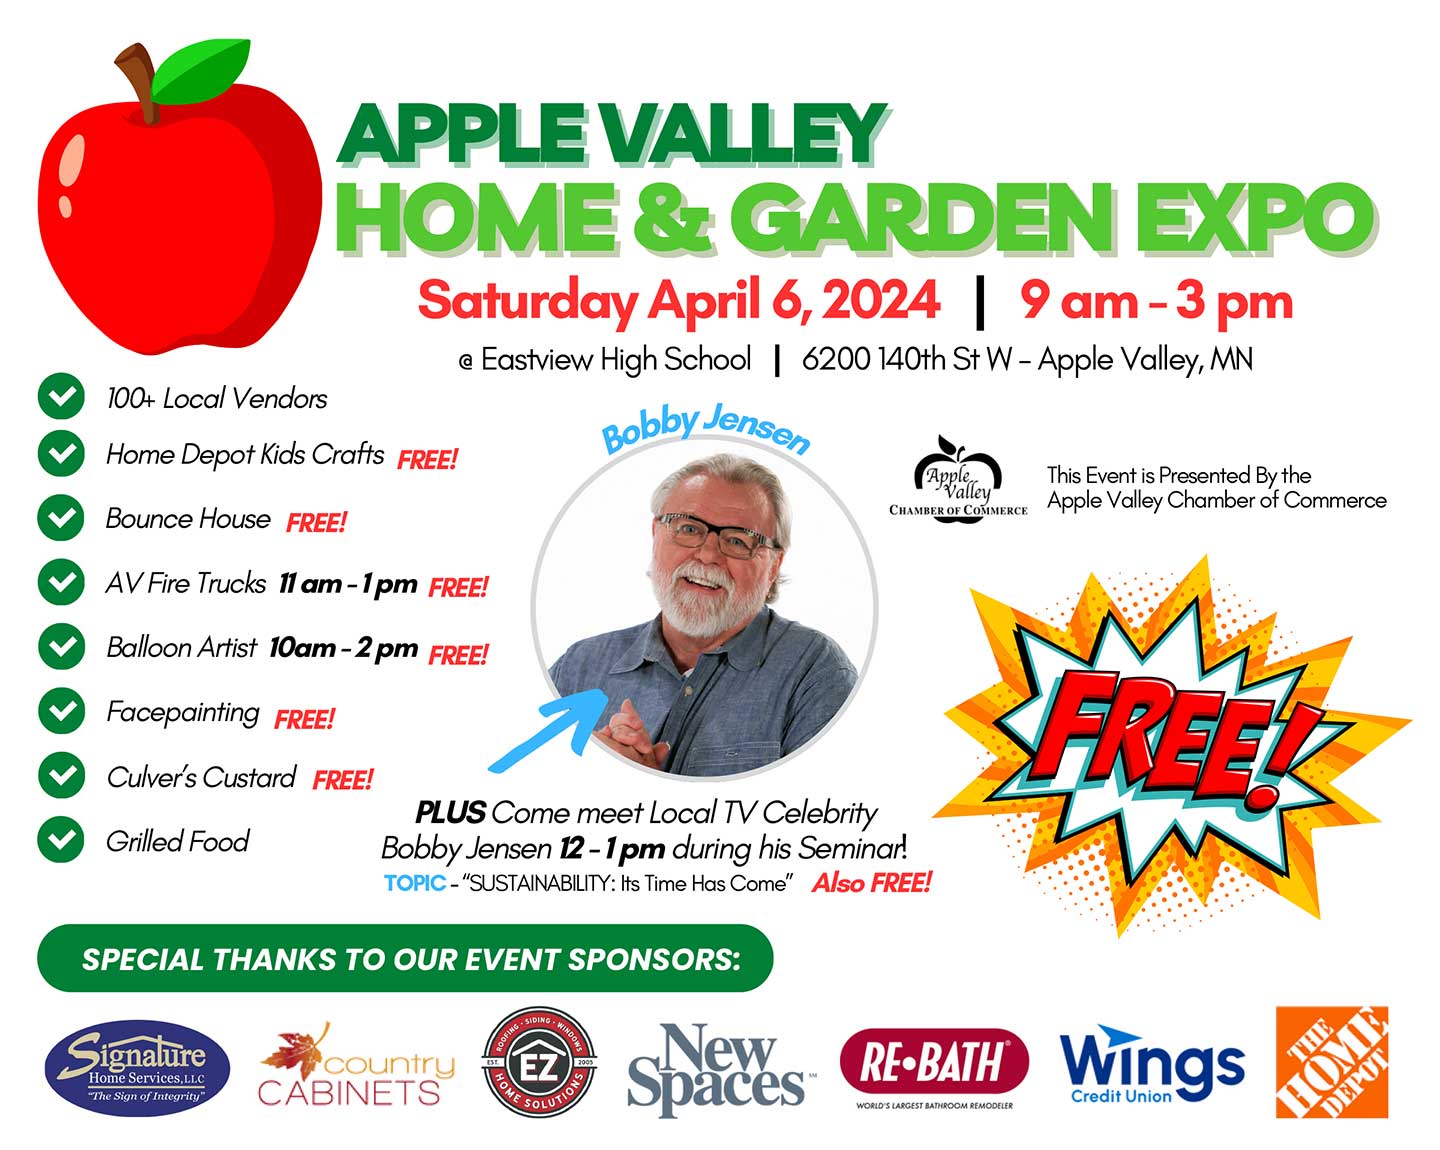 Apple Valley Home and Garden Expo - Saturday, April 12, 2025